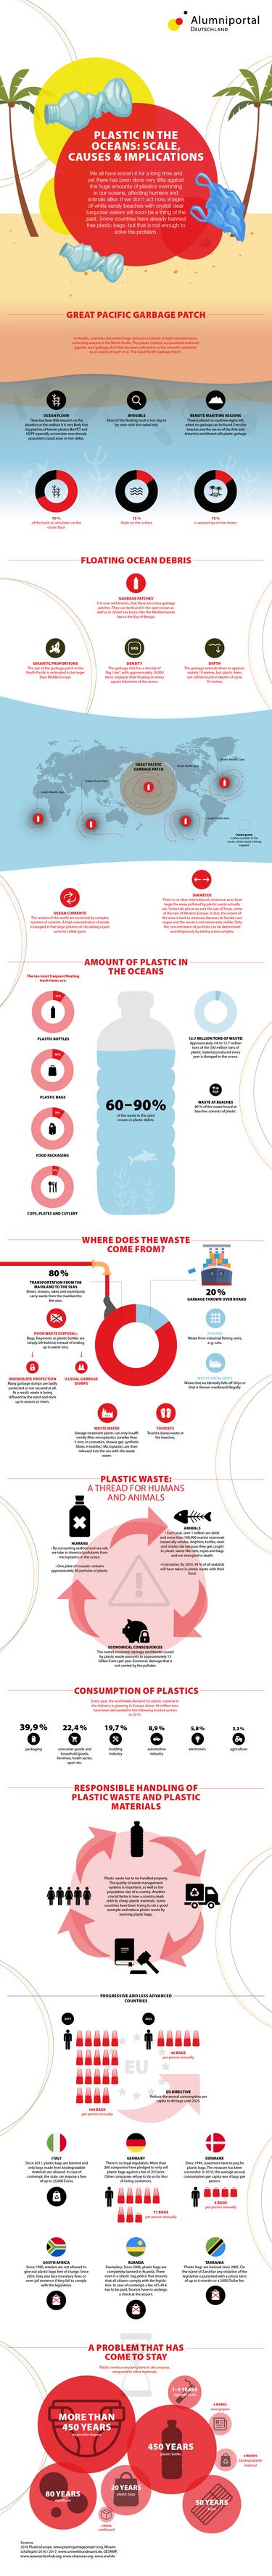 Infographic on plastic in the oceans